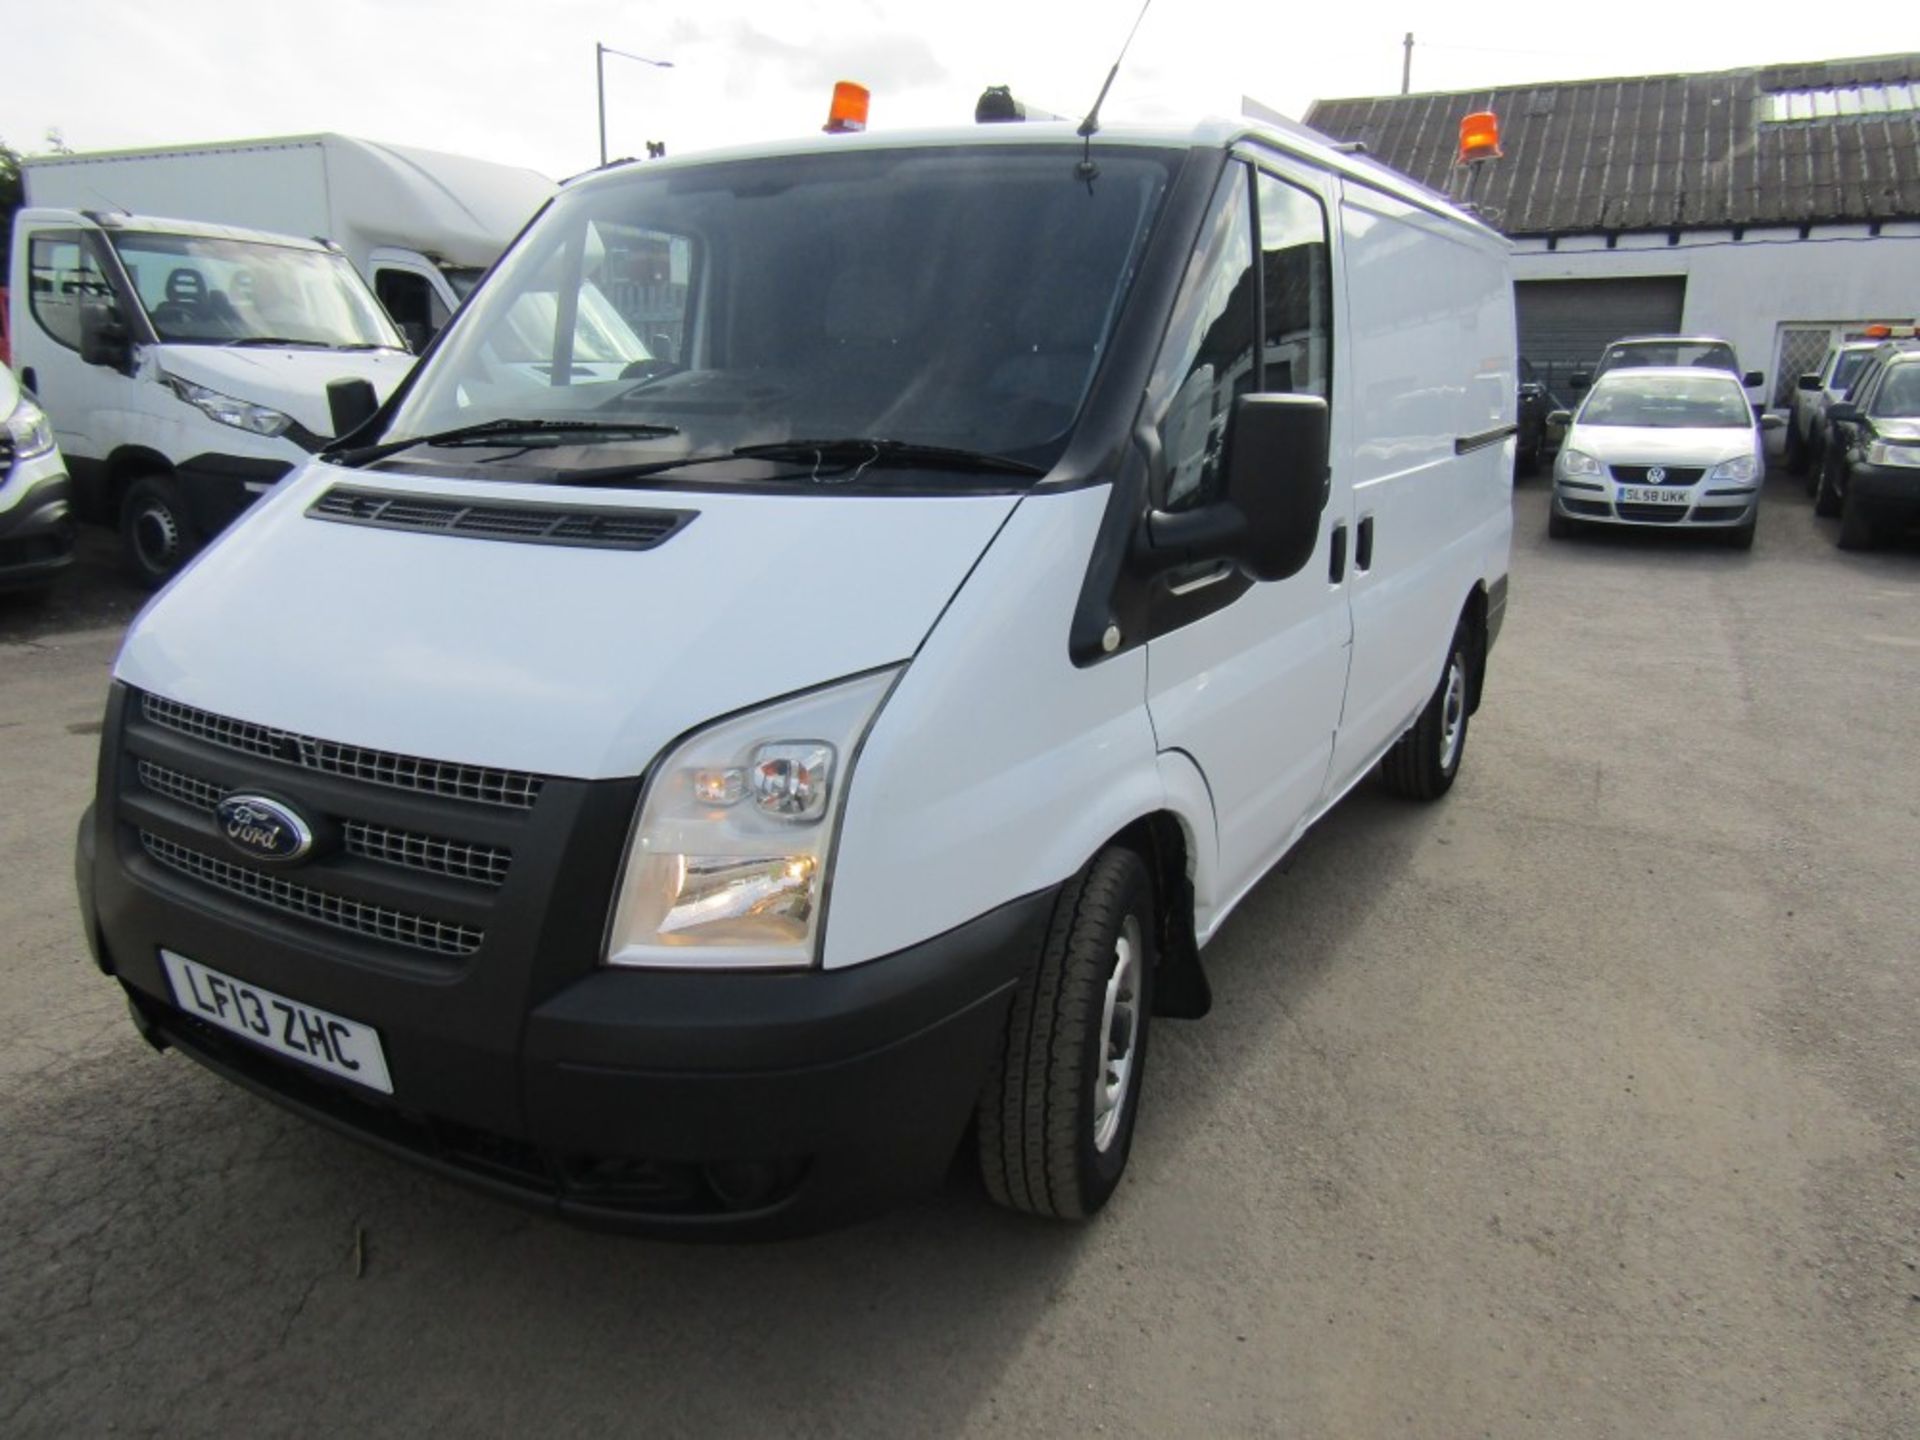 13 reg FORD TRANSIT 100 T300 FWD, 1ST REG 03/13, 99426M WARRANTED, V5 HERE, 1 OWNER FROM - Image 2 of 8